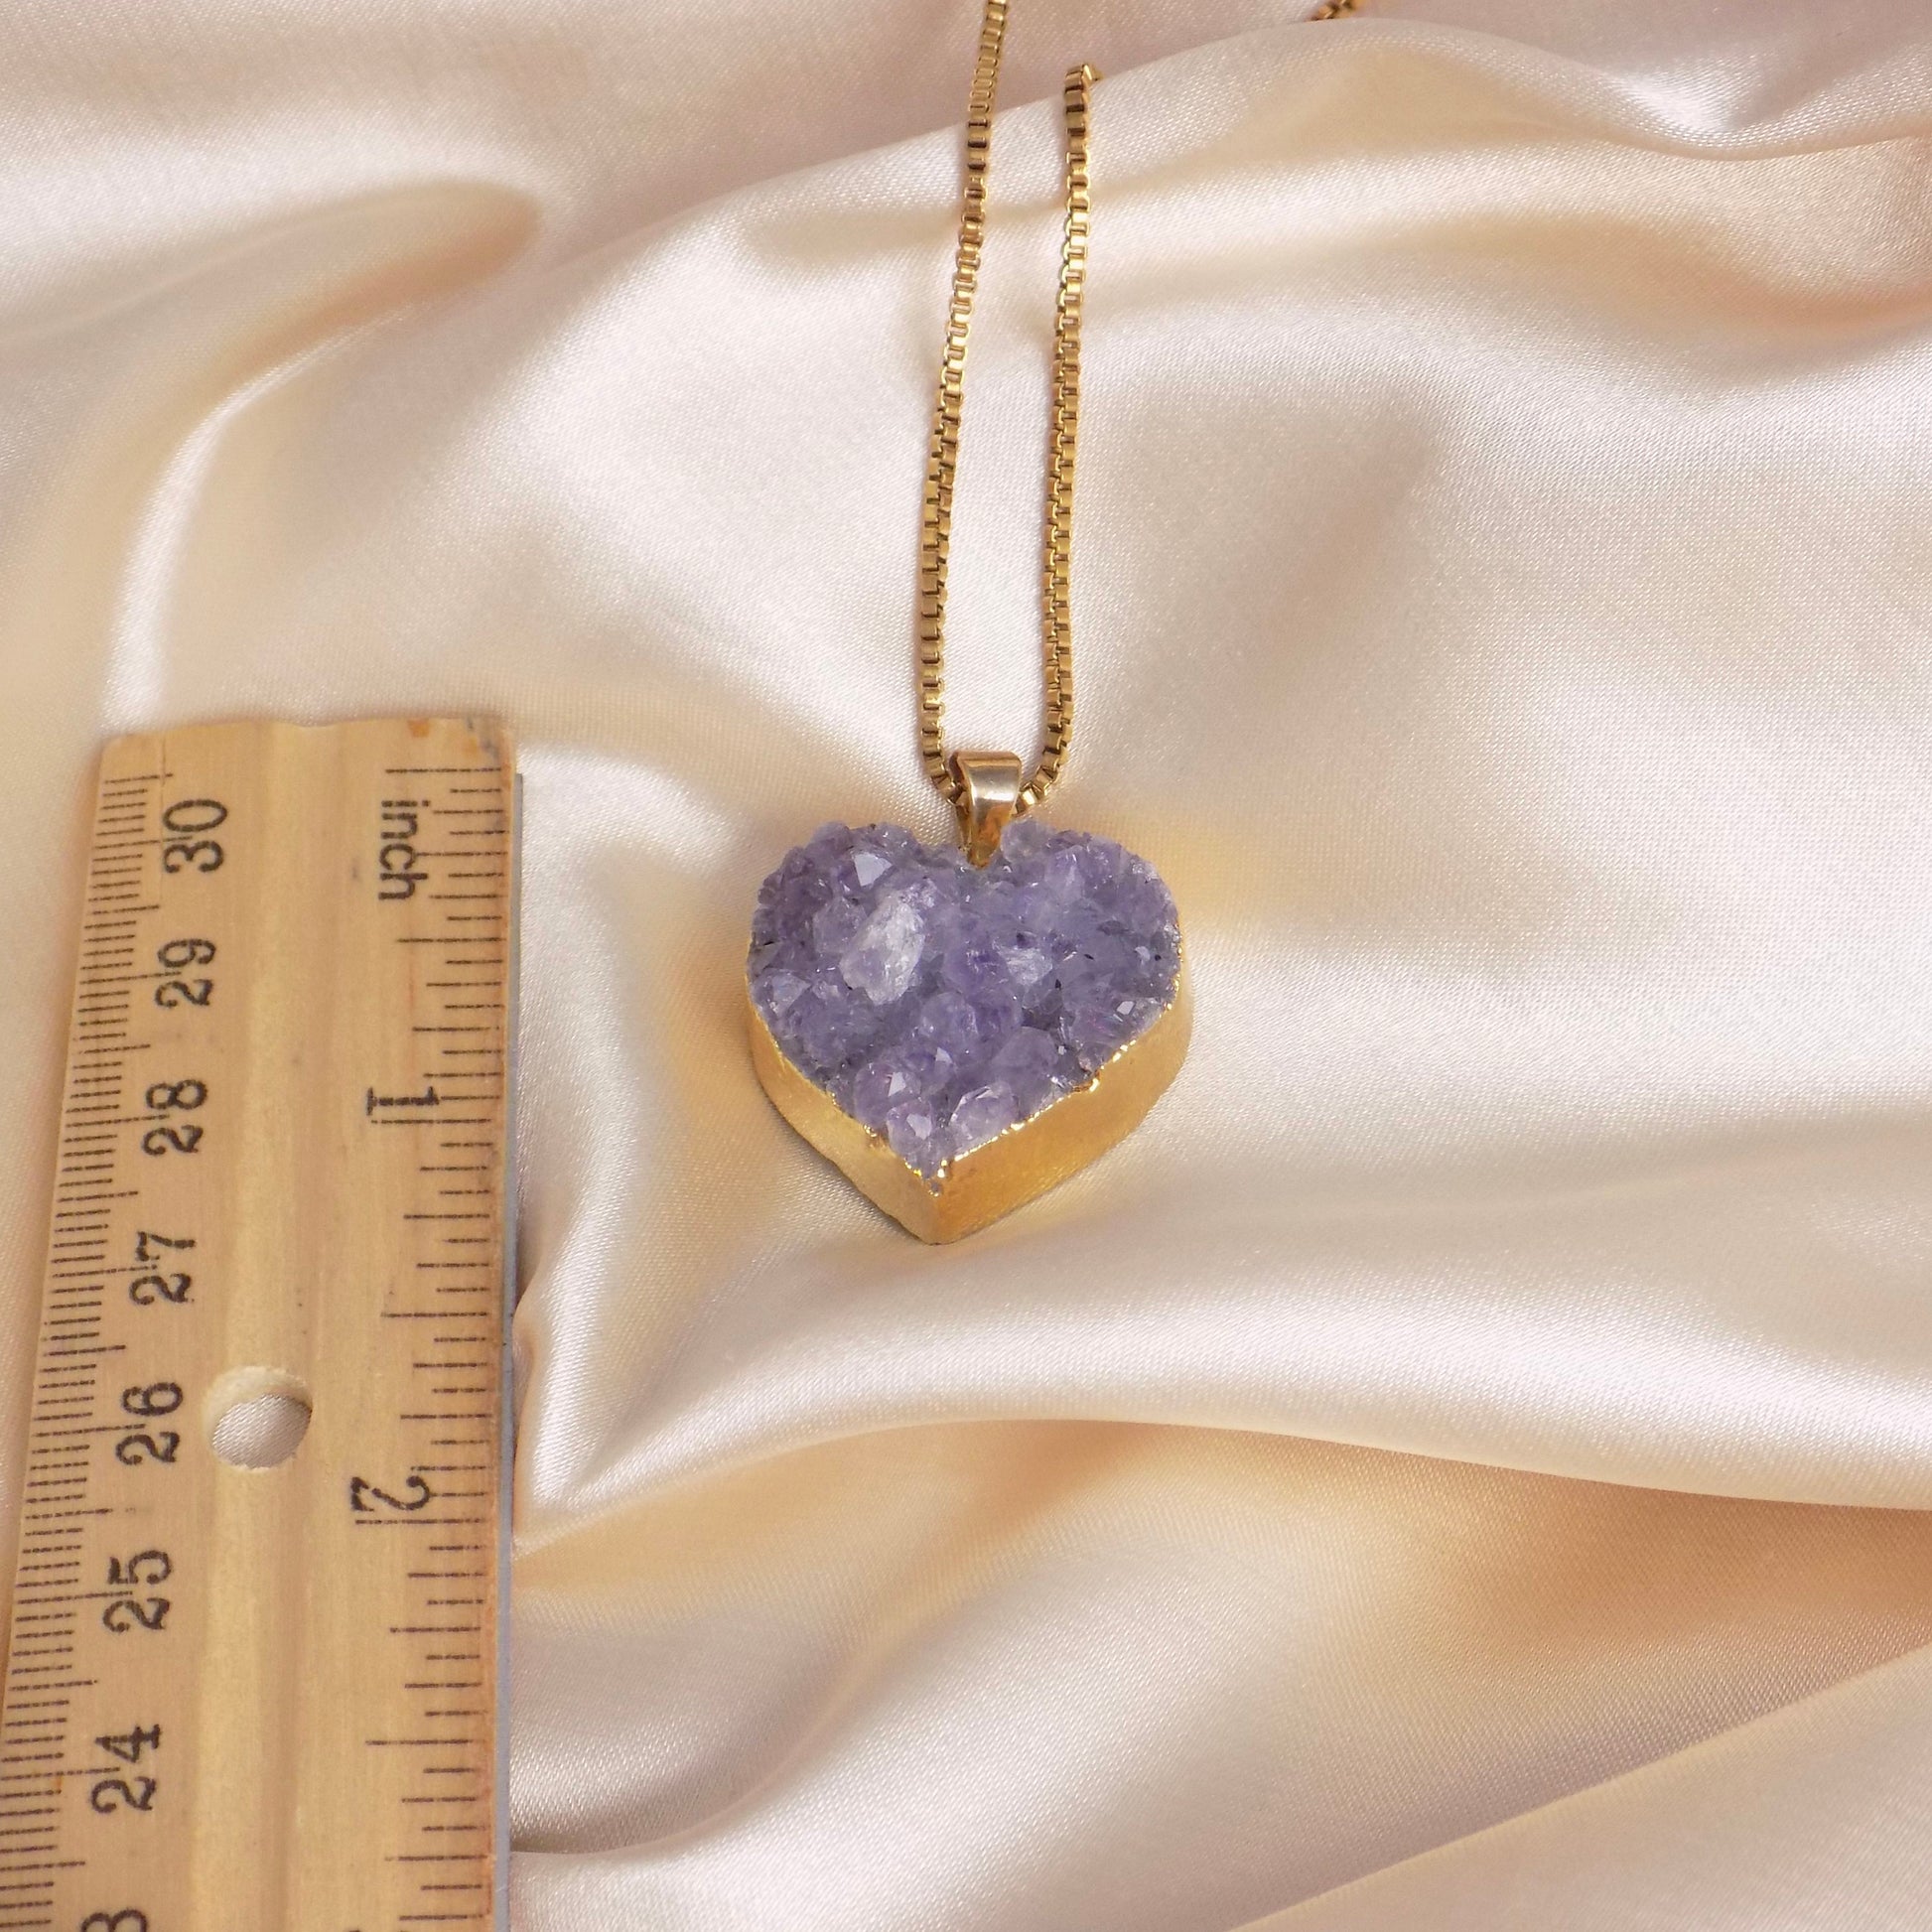 Amethyst Heart Necklace Gold, Box Chain 18K Gold Stainless Steel, Mom Gift, Wife Gift, Best Friend Gifts, G15-151